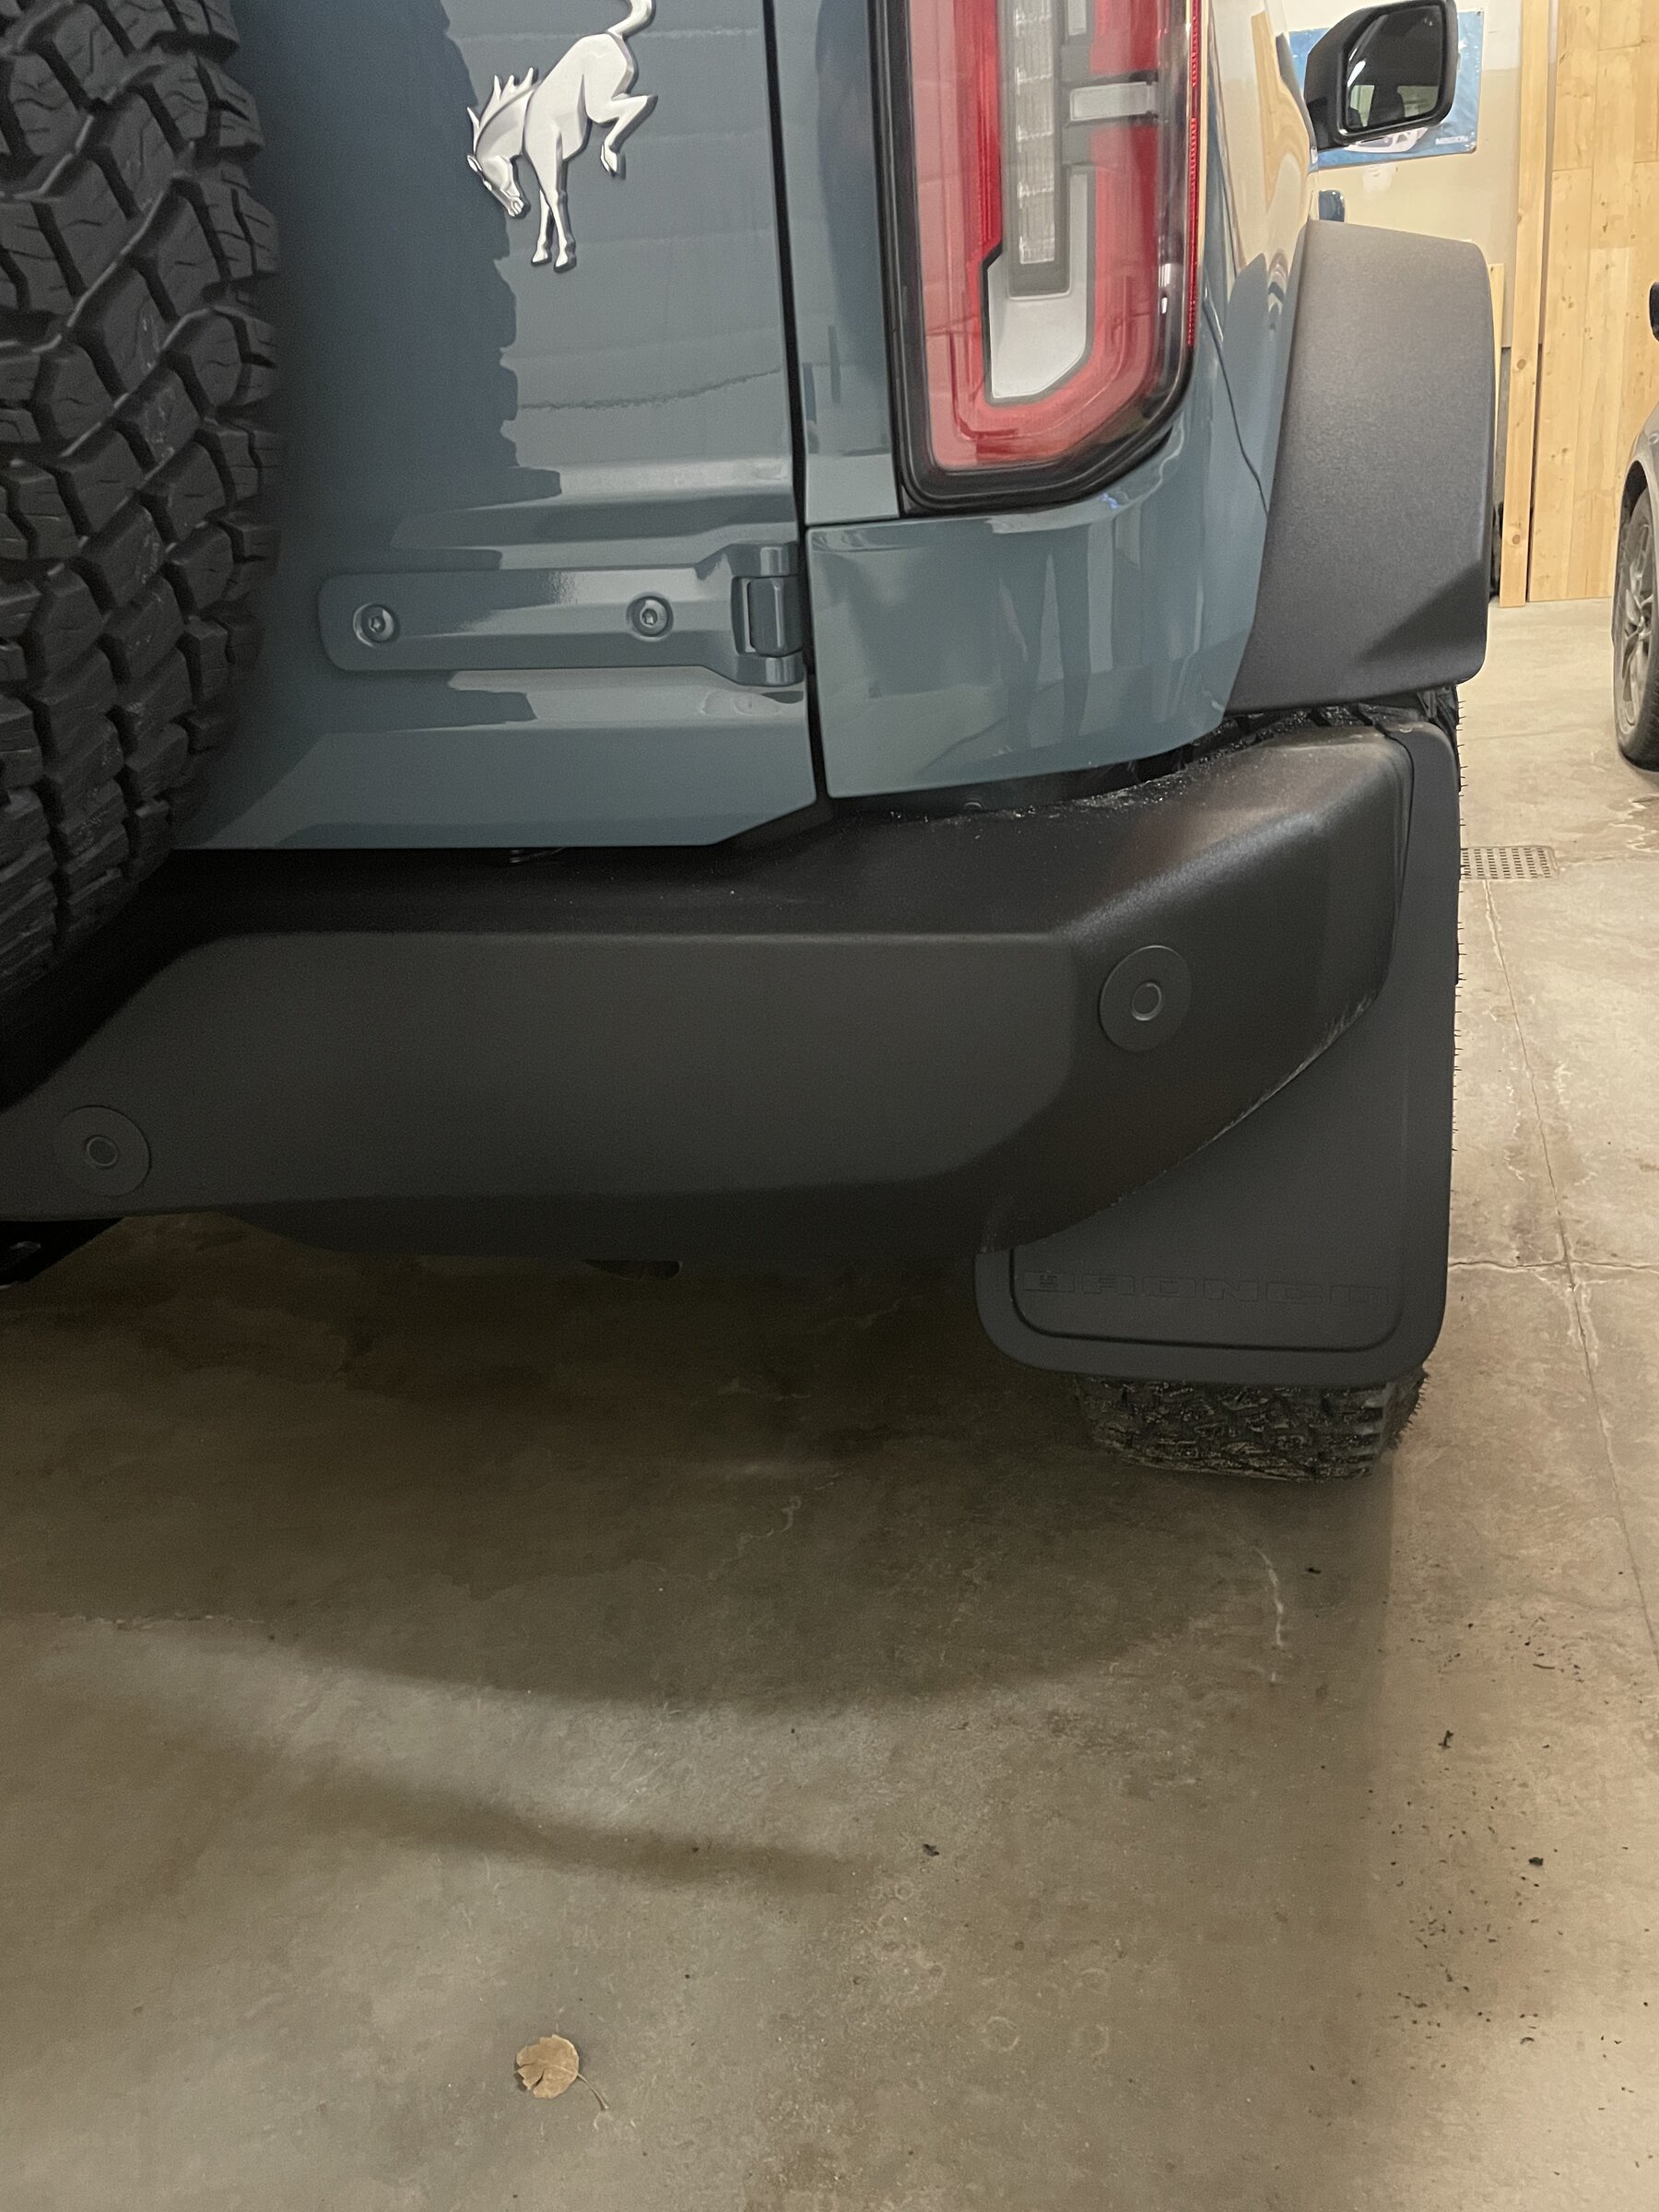 Ford Bronco Ford OEM Mud Flaps / Splash Guards trimmed to fit OBX Sasquatch with side steps 350B8652-F4B0-4FCF-892E-7701C5403822